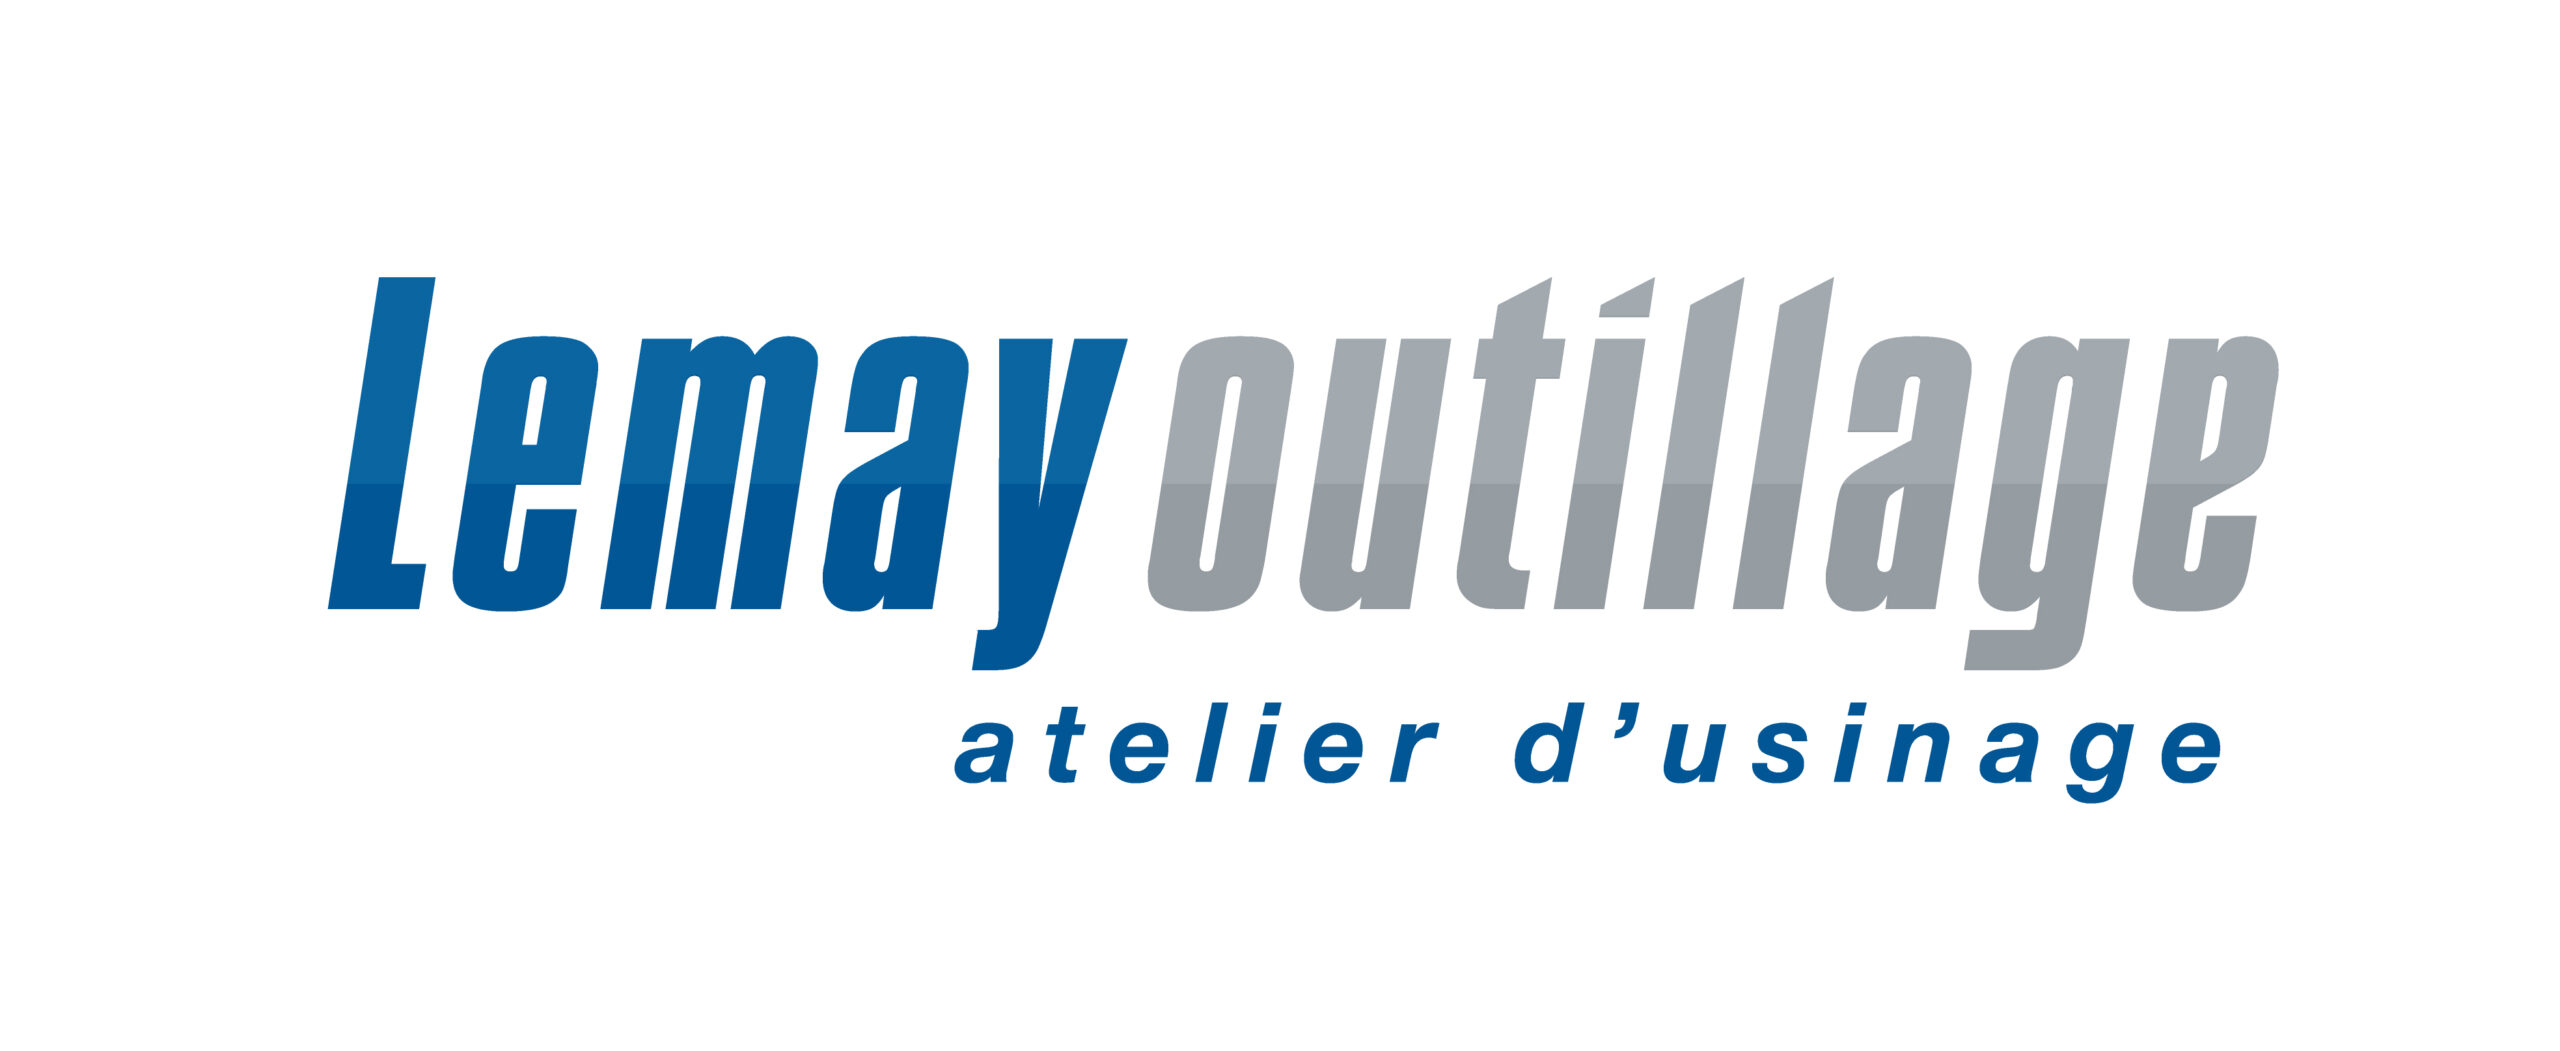 Lemay Outillage